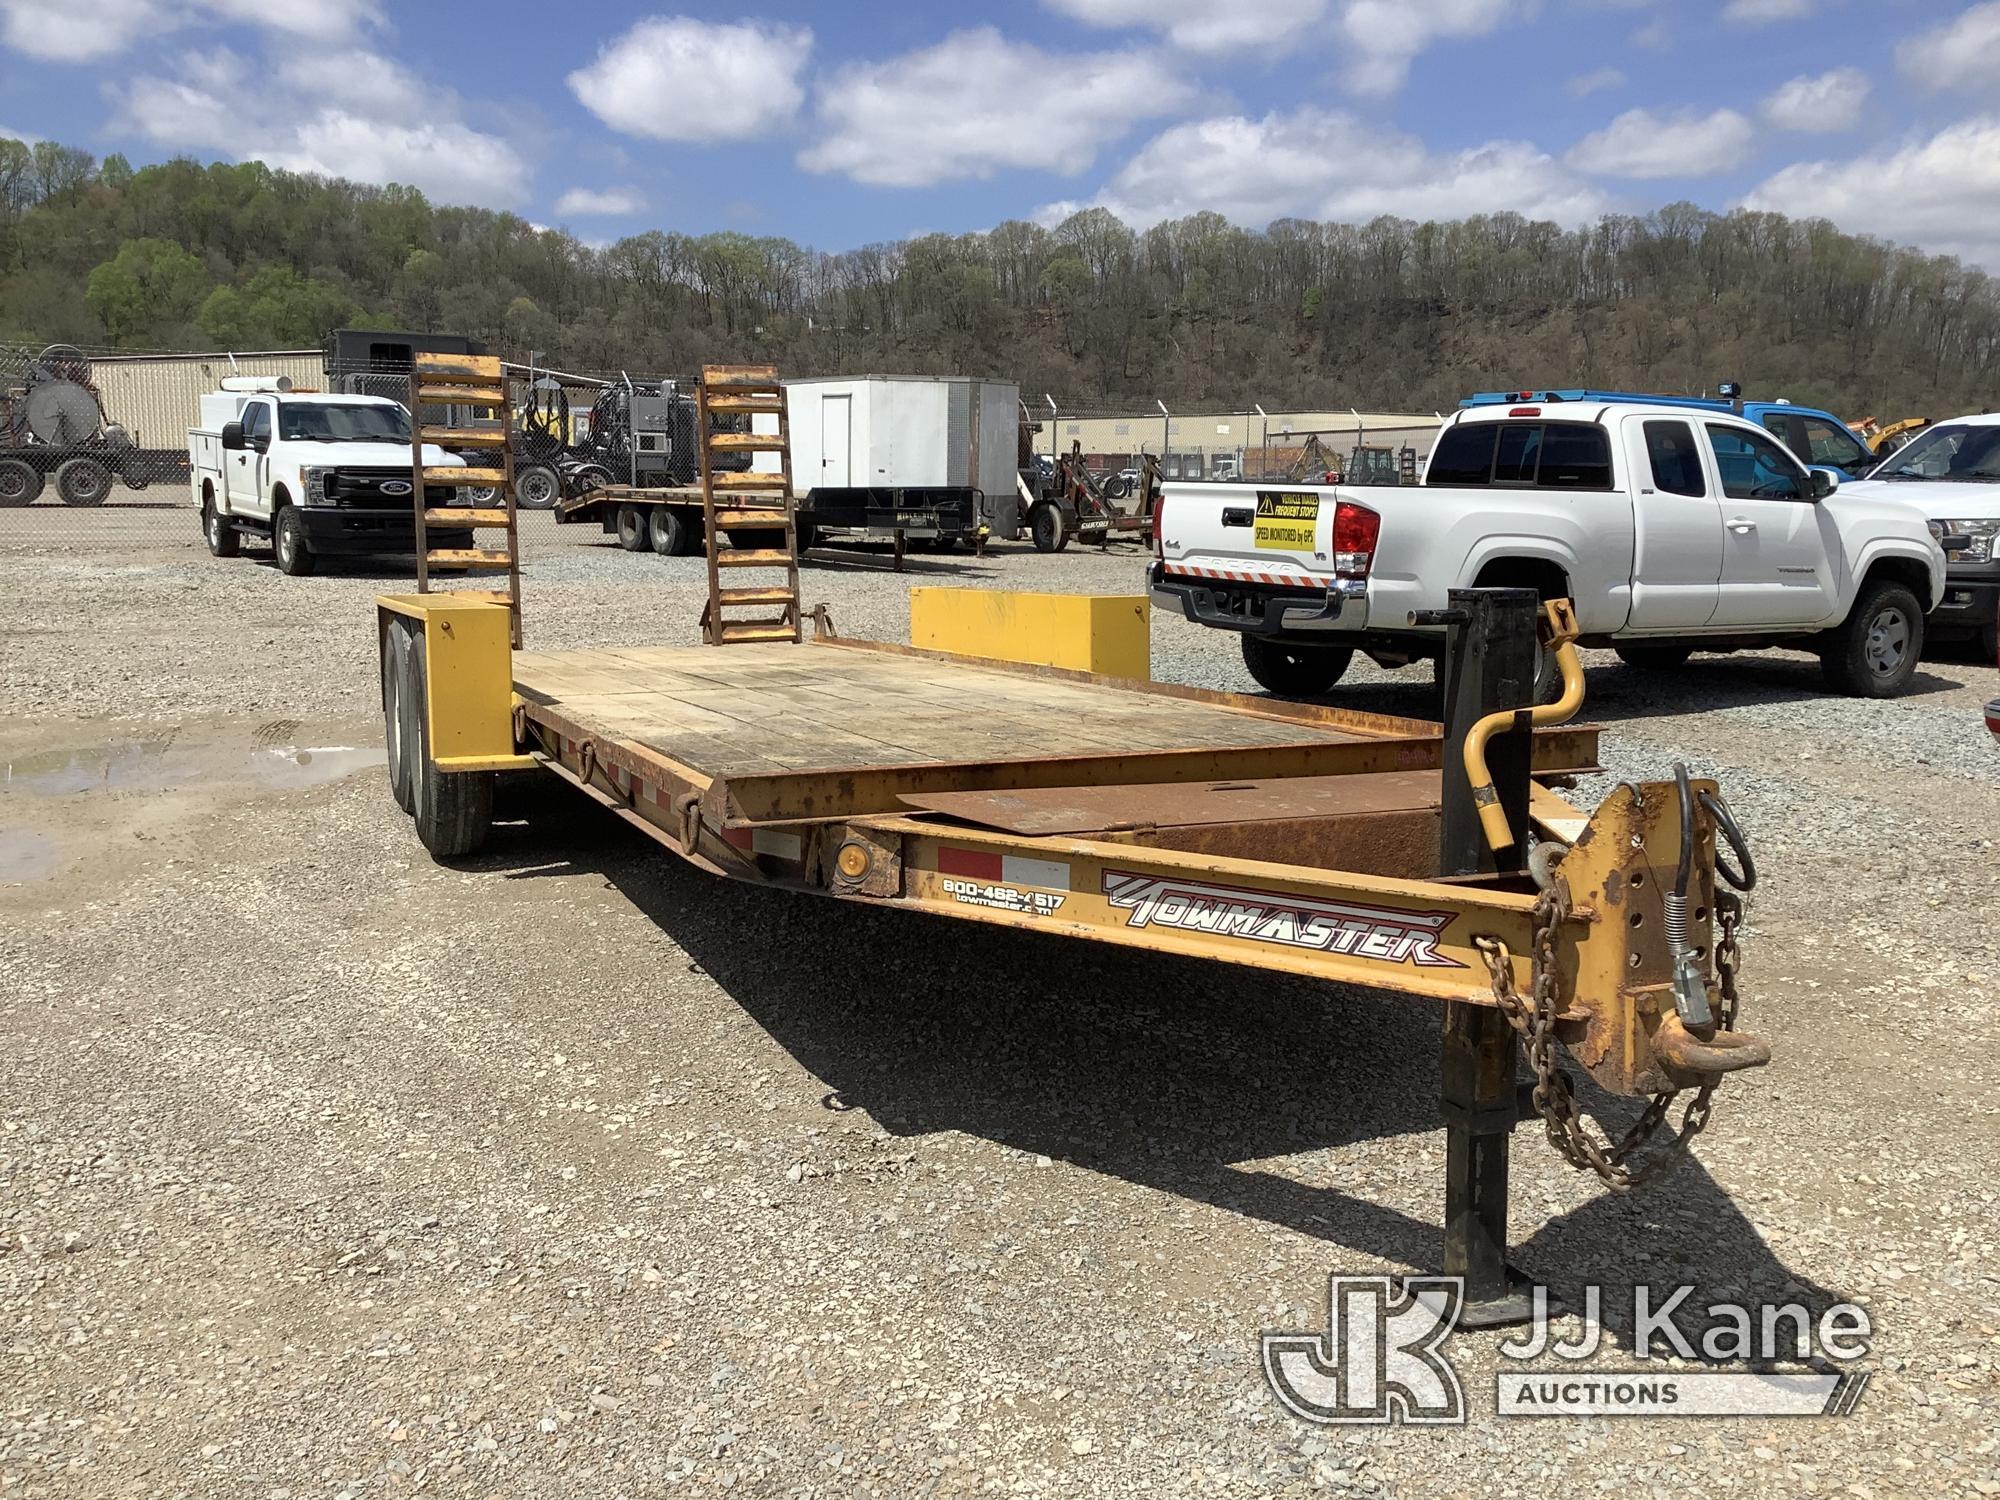 (Smock, PA) 2017 Monroe Towmaster 12D T/A Tagalong Equipment Trailer Rust Damage